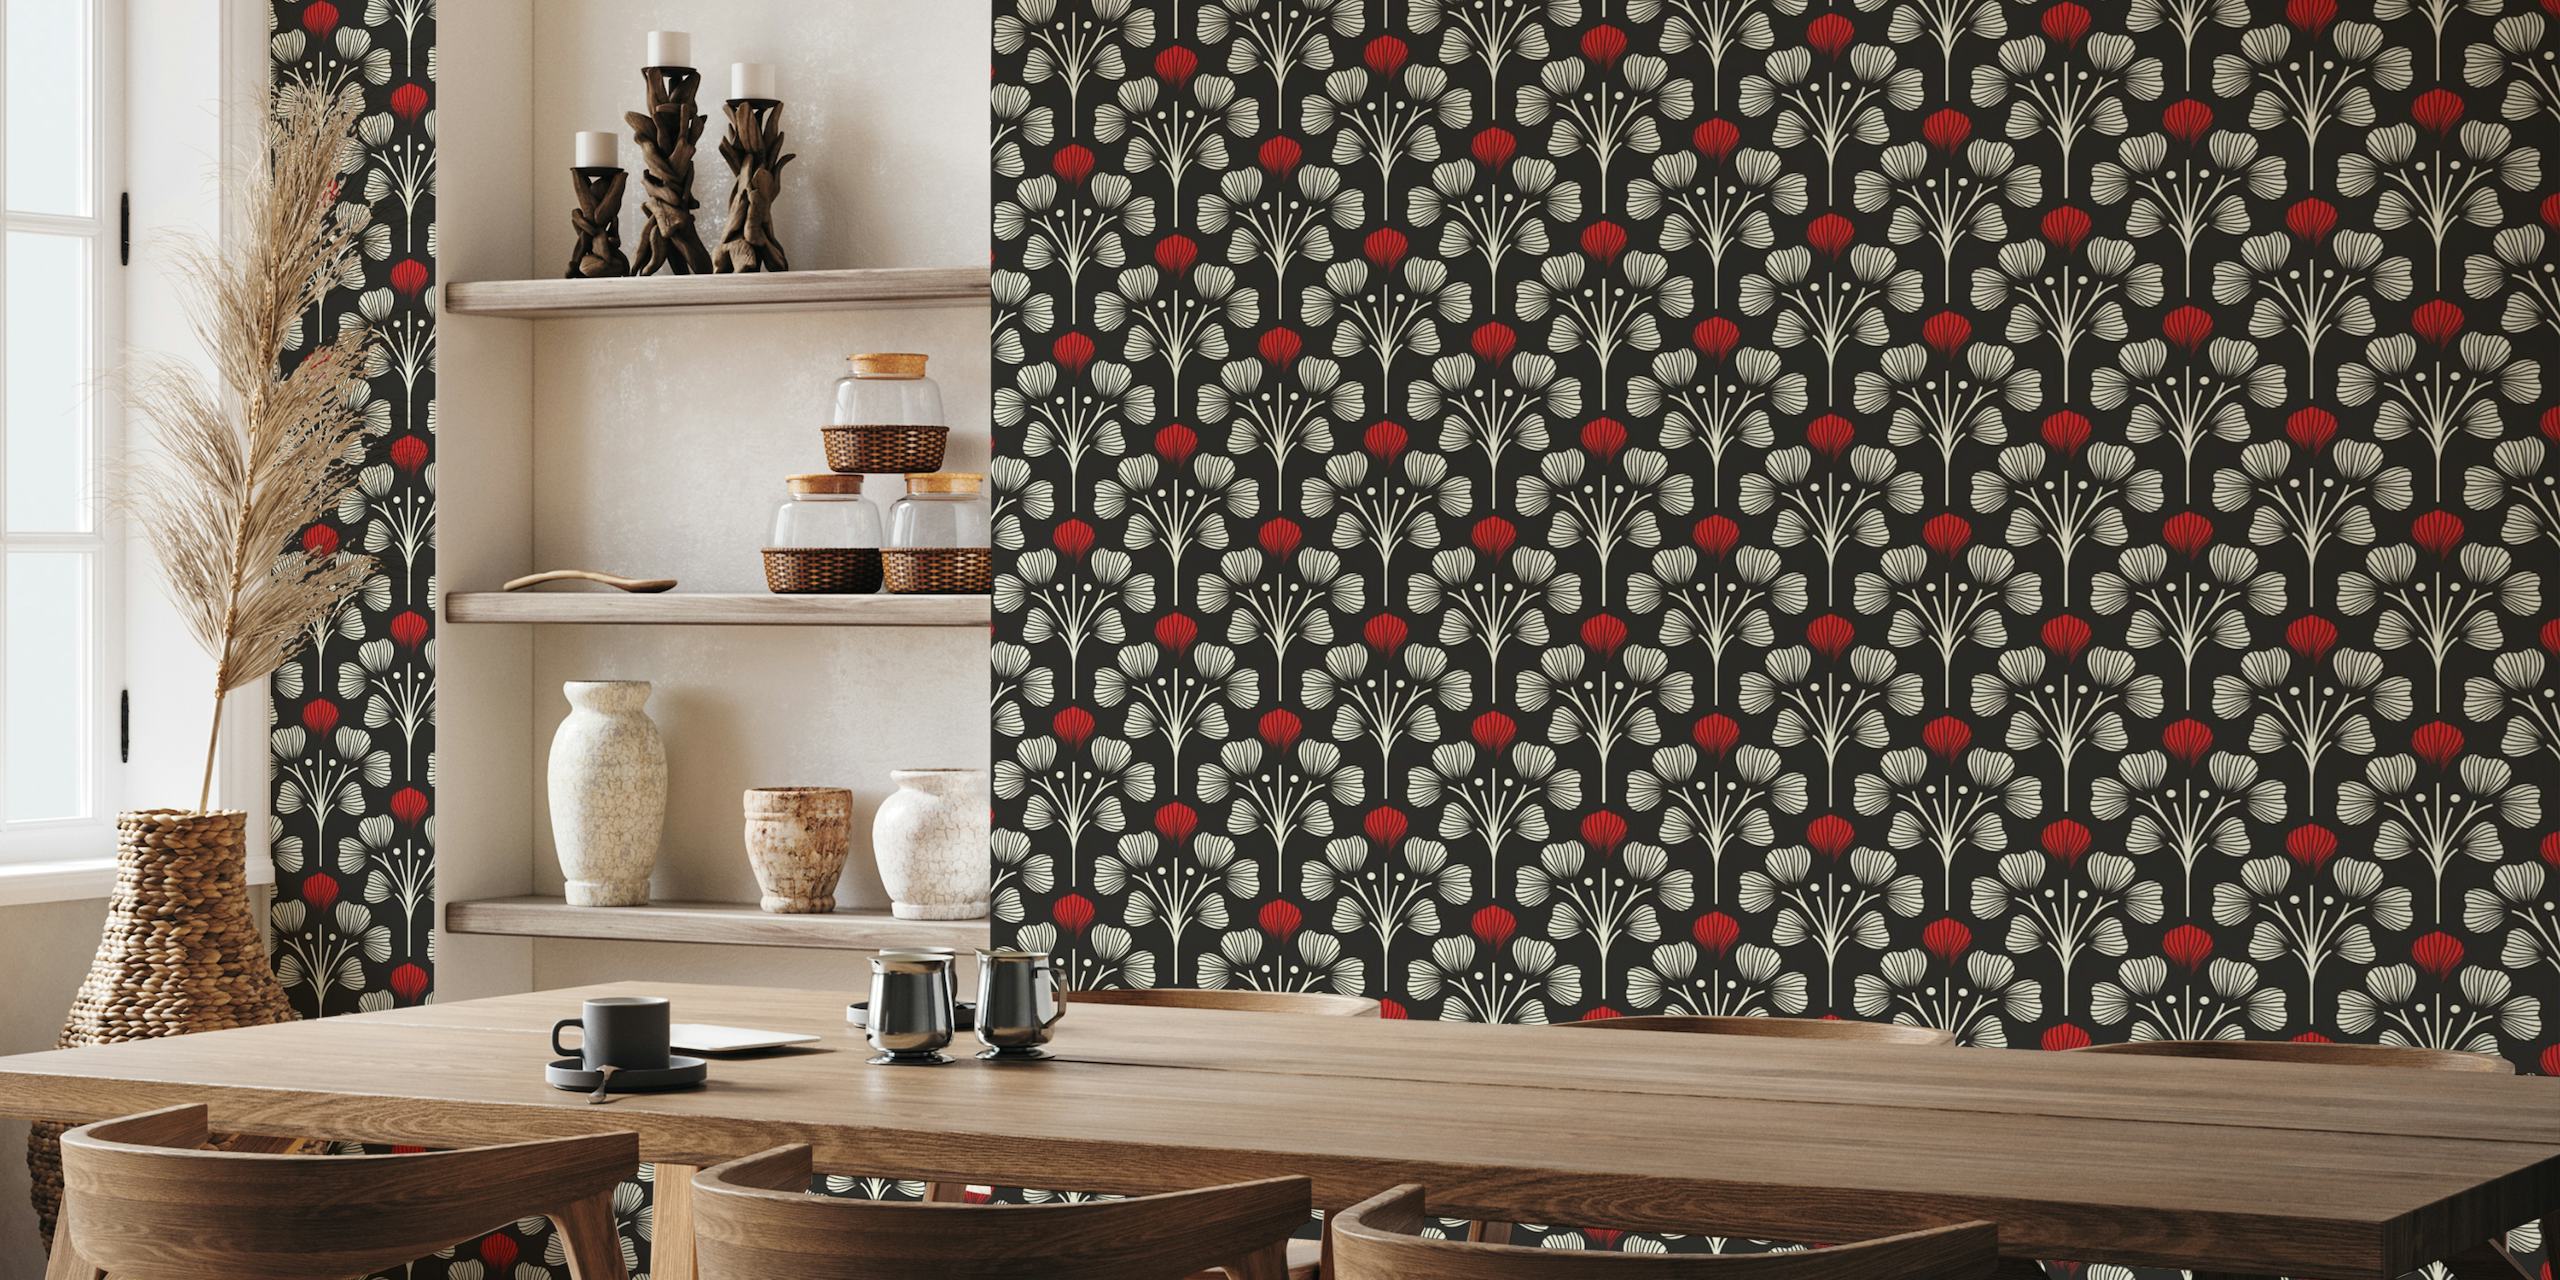 2674 A - floral pattern, black white red tapetit